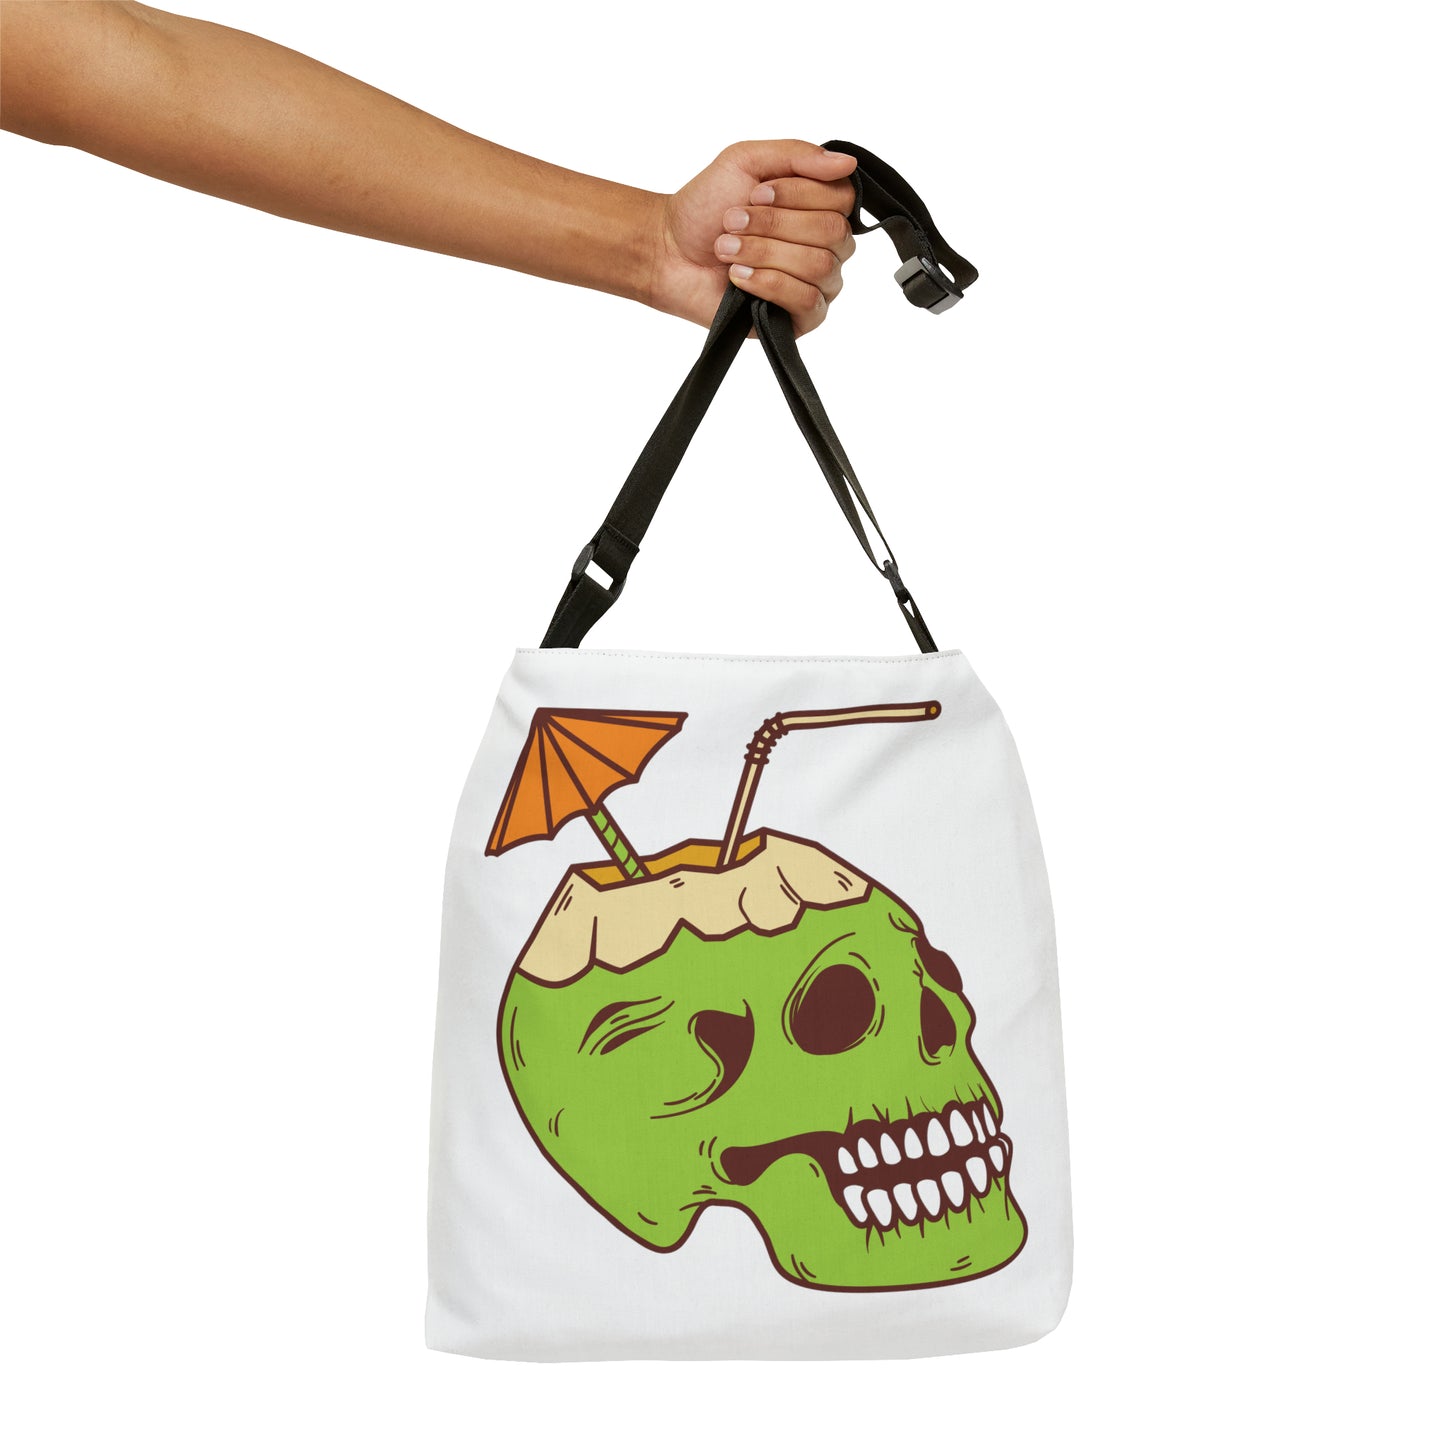 Skull Umbrella Drink Tote, Adjustable Tote Bag (AOP) with Interior Zippered Pocket, Available in 2 Sizes